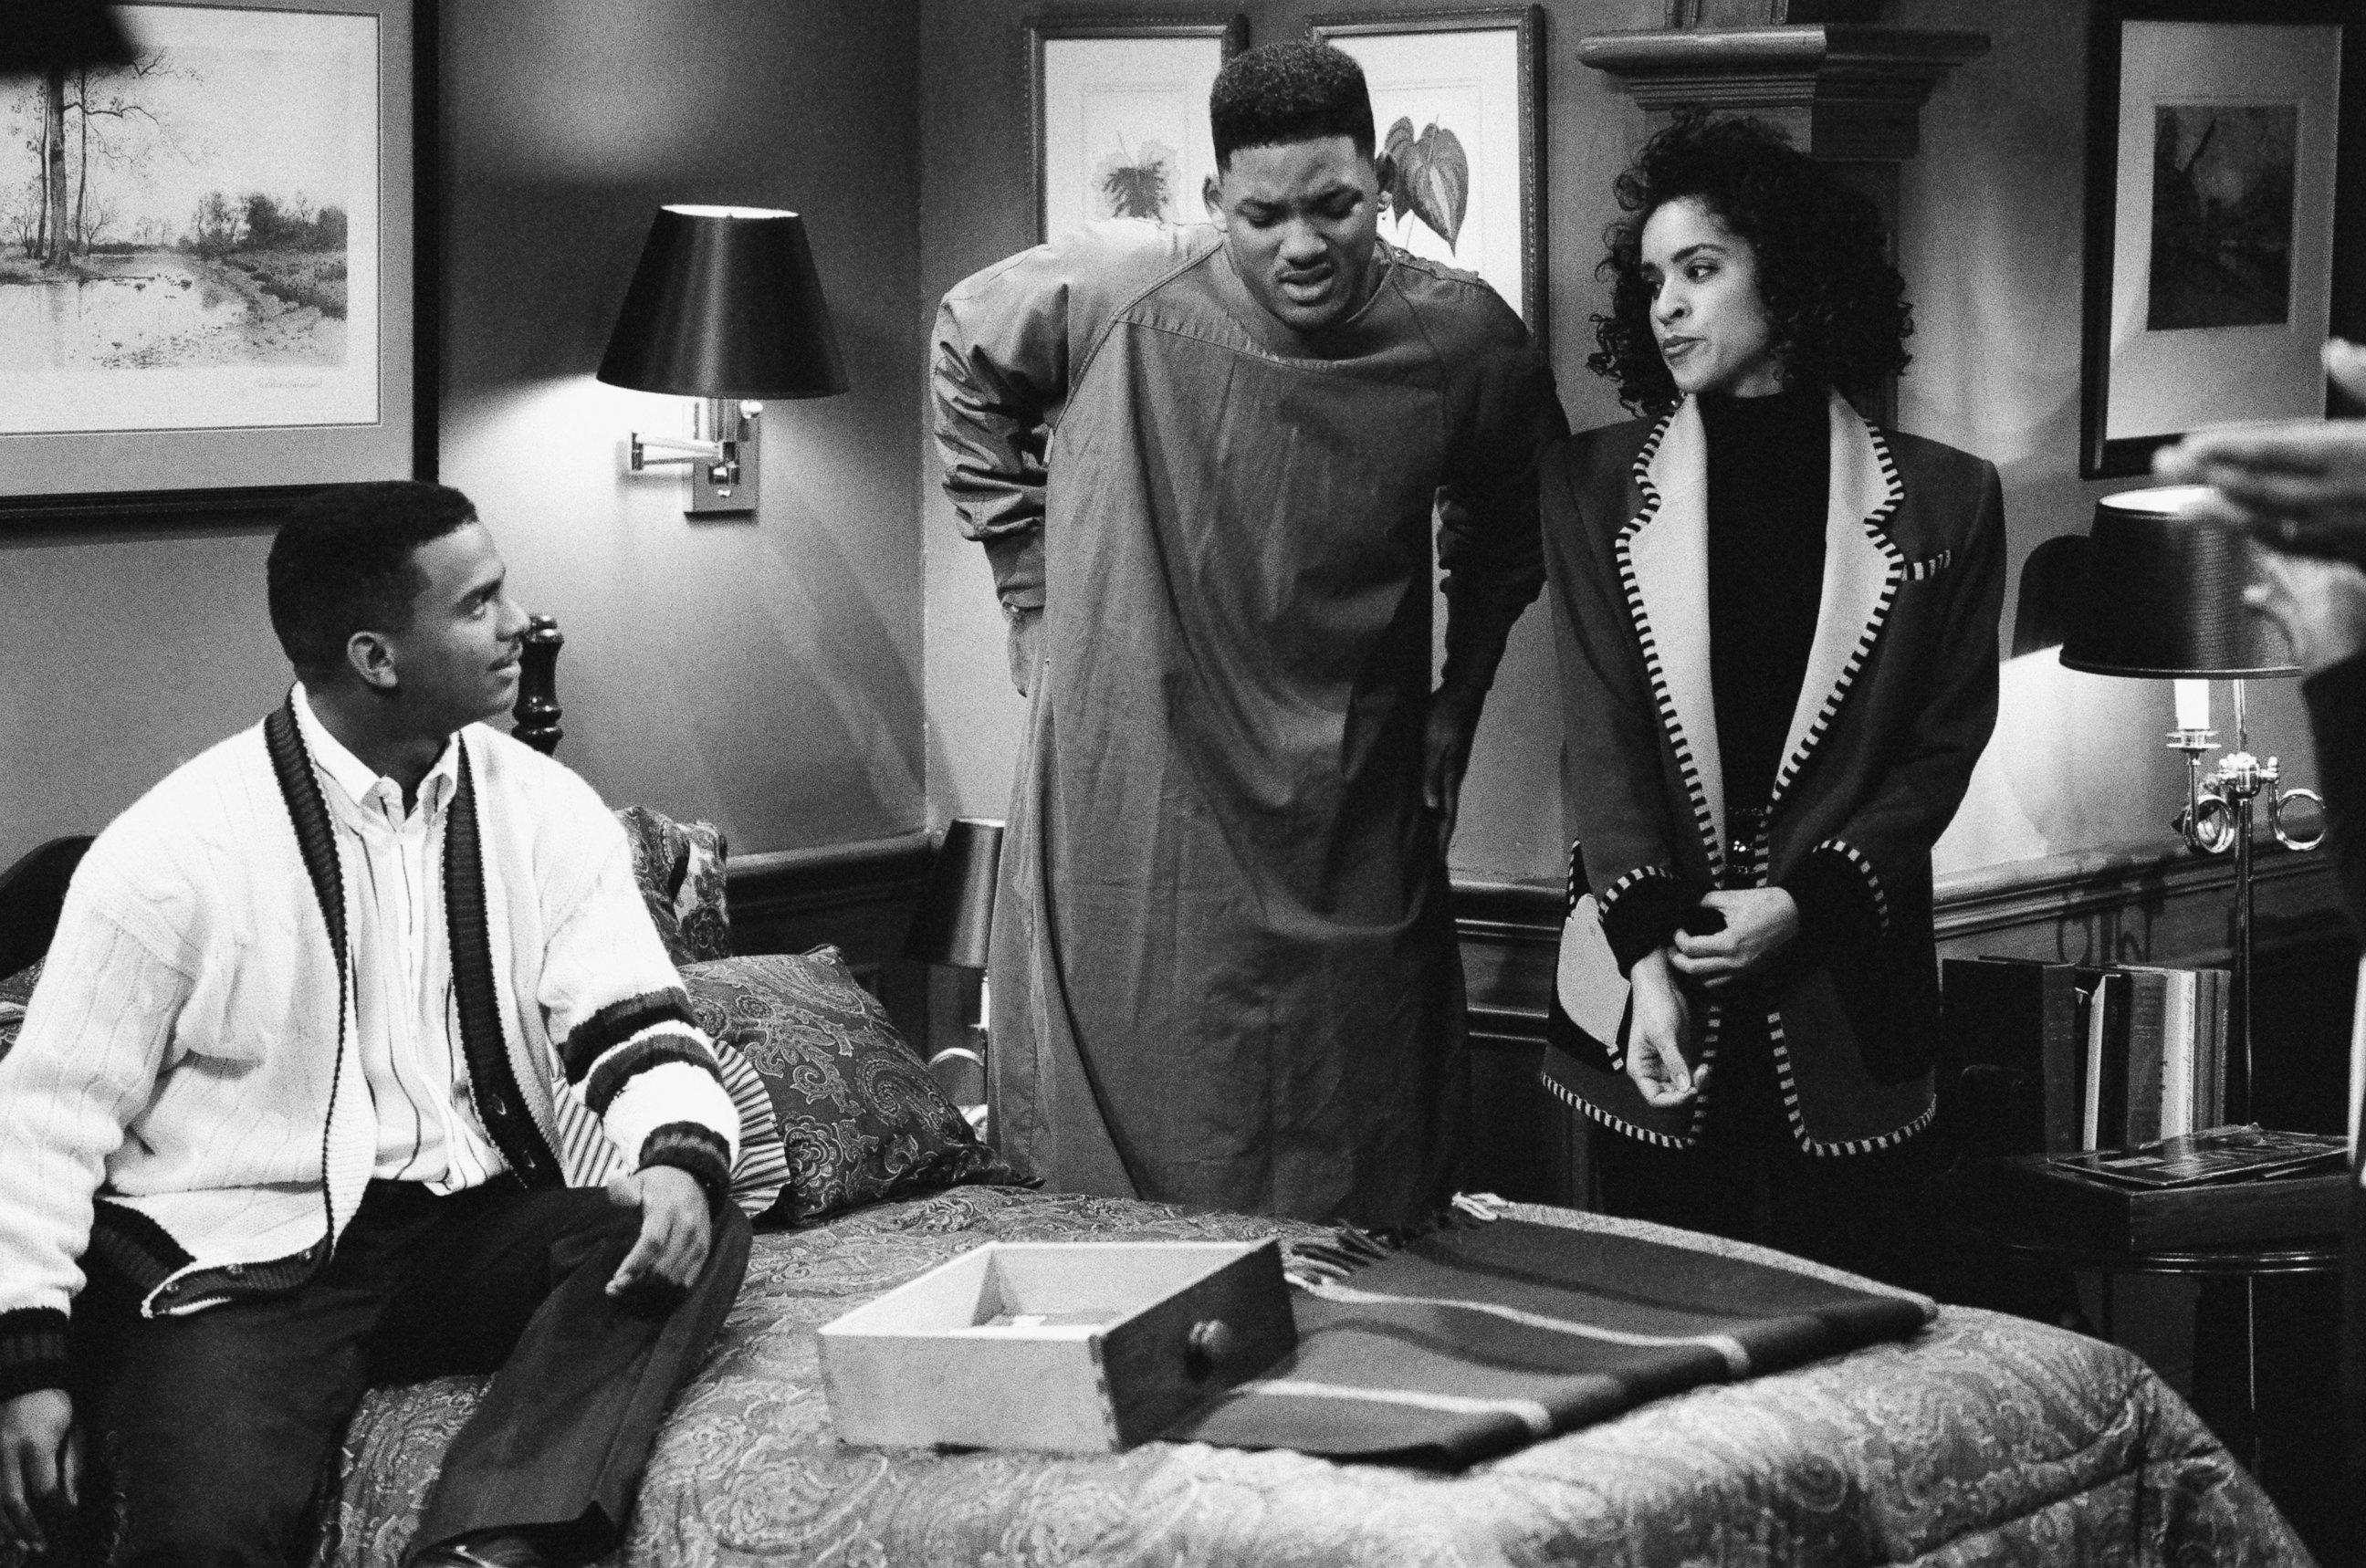 PHOTO: From the left, Alfonso Ribeiro as Carlton Banks, Will Smith as William 'Will' Smith, Karyn Parsons as Hilary Banks in "The Fresh Prince of Bel-Air."